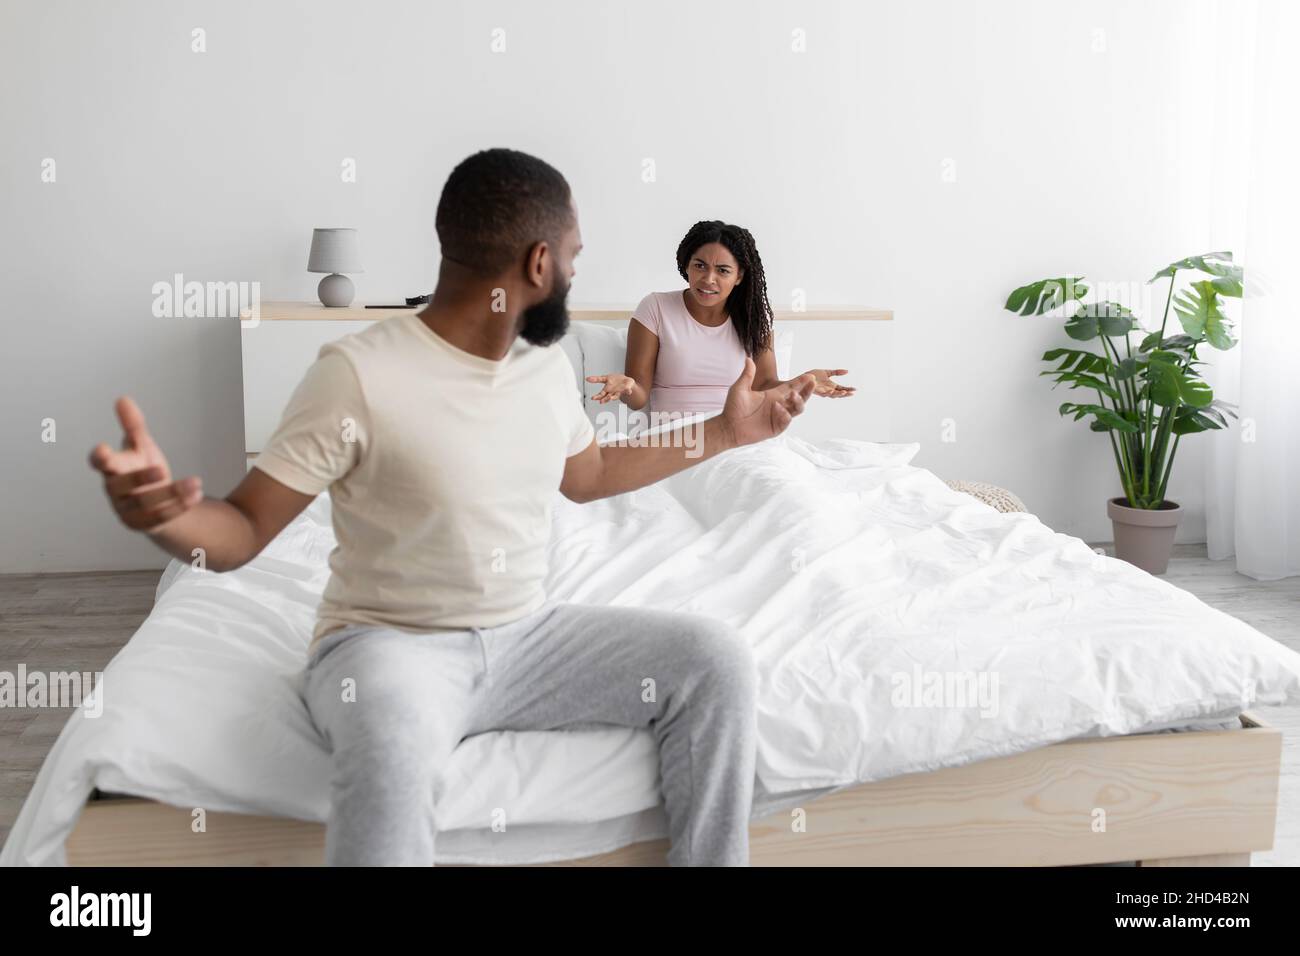 Irate unhappy excited millennial black woman and man swearing, freaking out, shouting and gesturing on bed Stock Photo